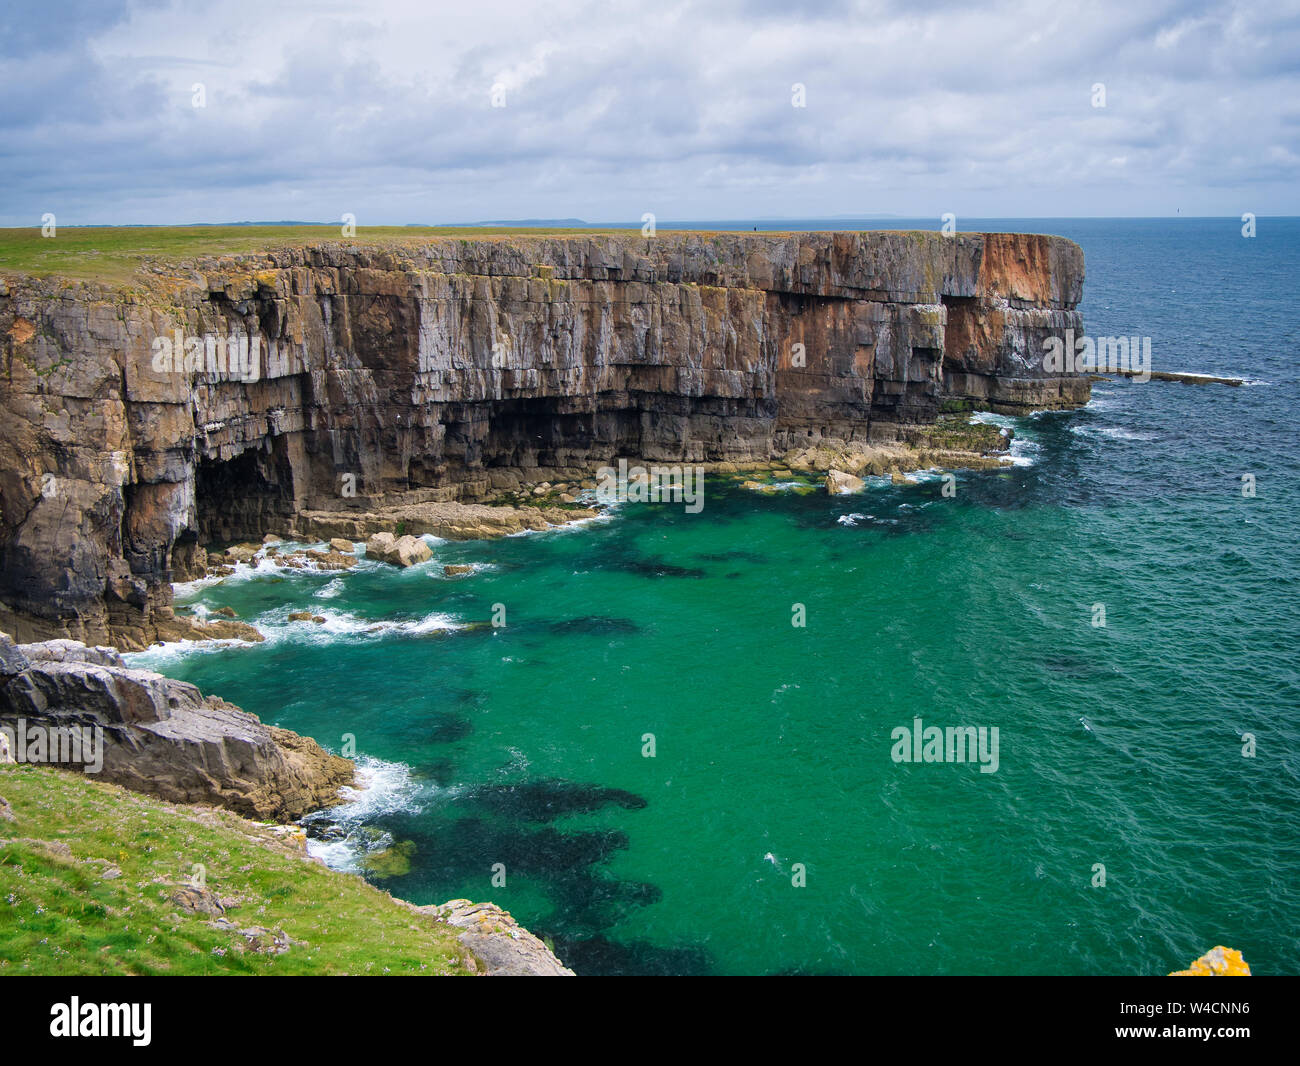 Coastal cliffs showing stratified rock formations in Pembrokeshire, South Wales, UK, as viewed from the Coast Path Stock Photo